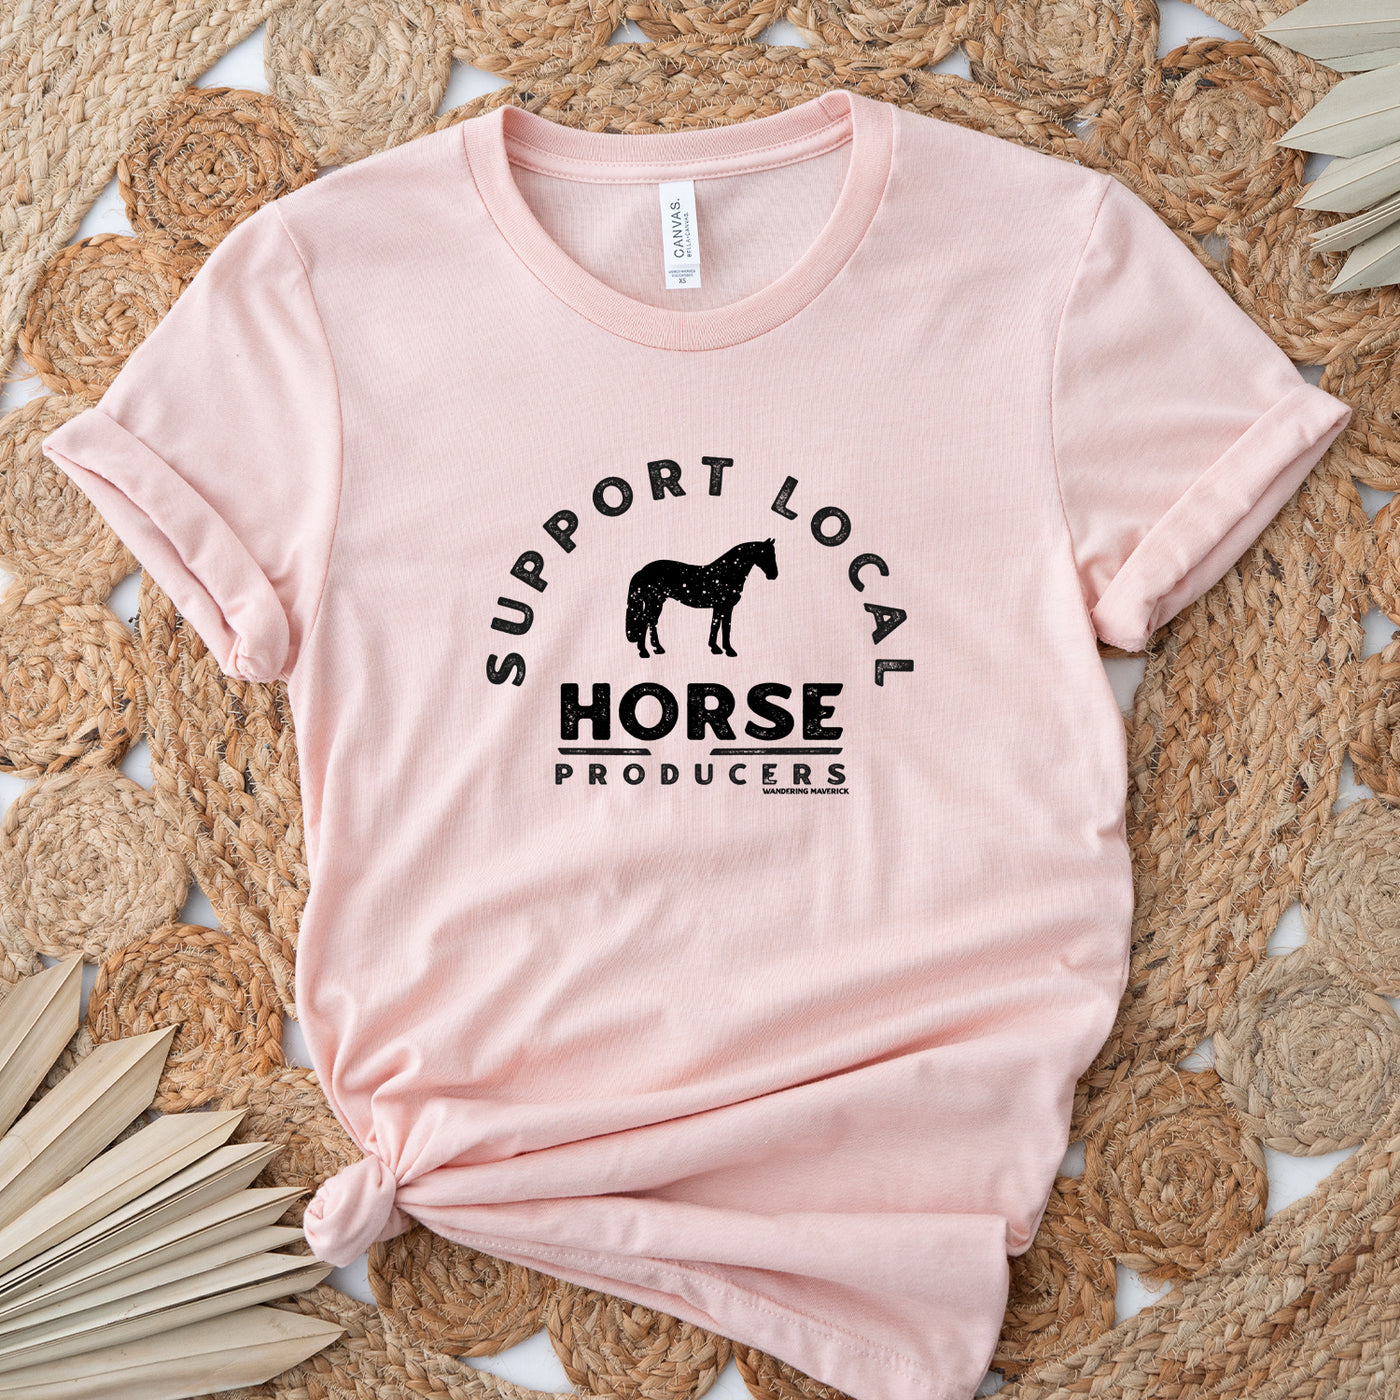 Support Your Local Horse Producers T-Shirt (XS-4XL) - Multiple Colors!